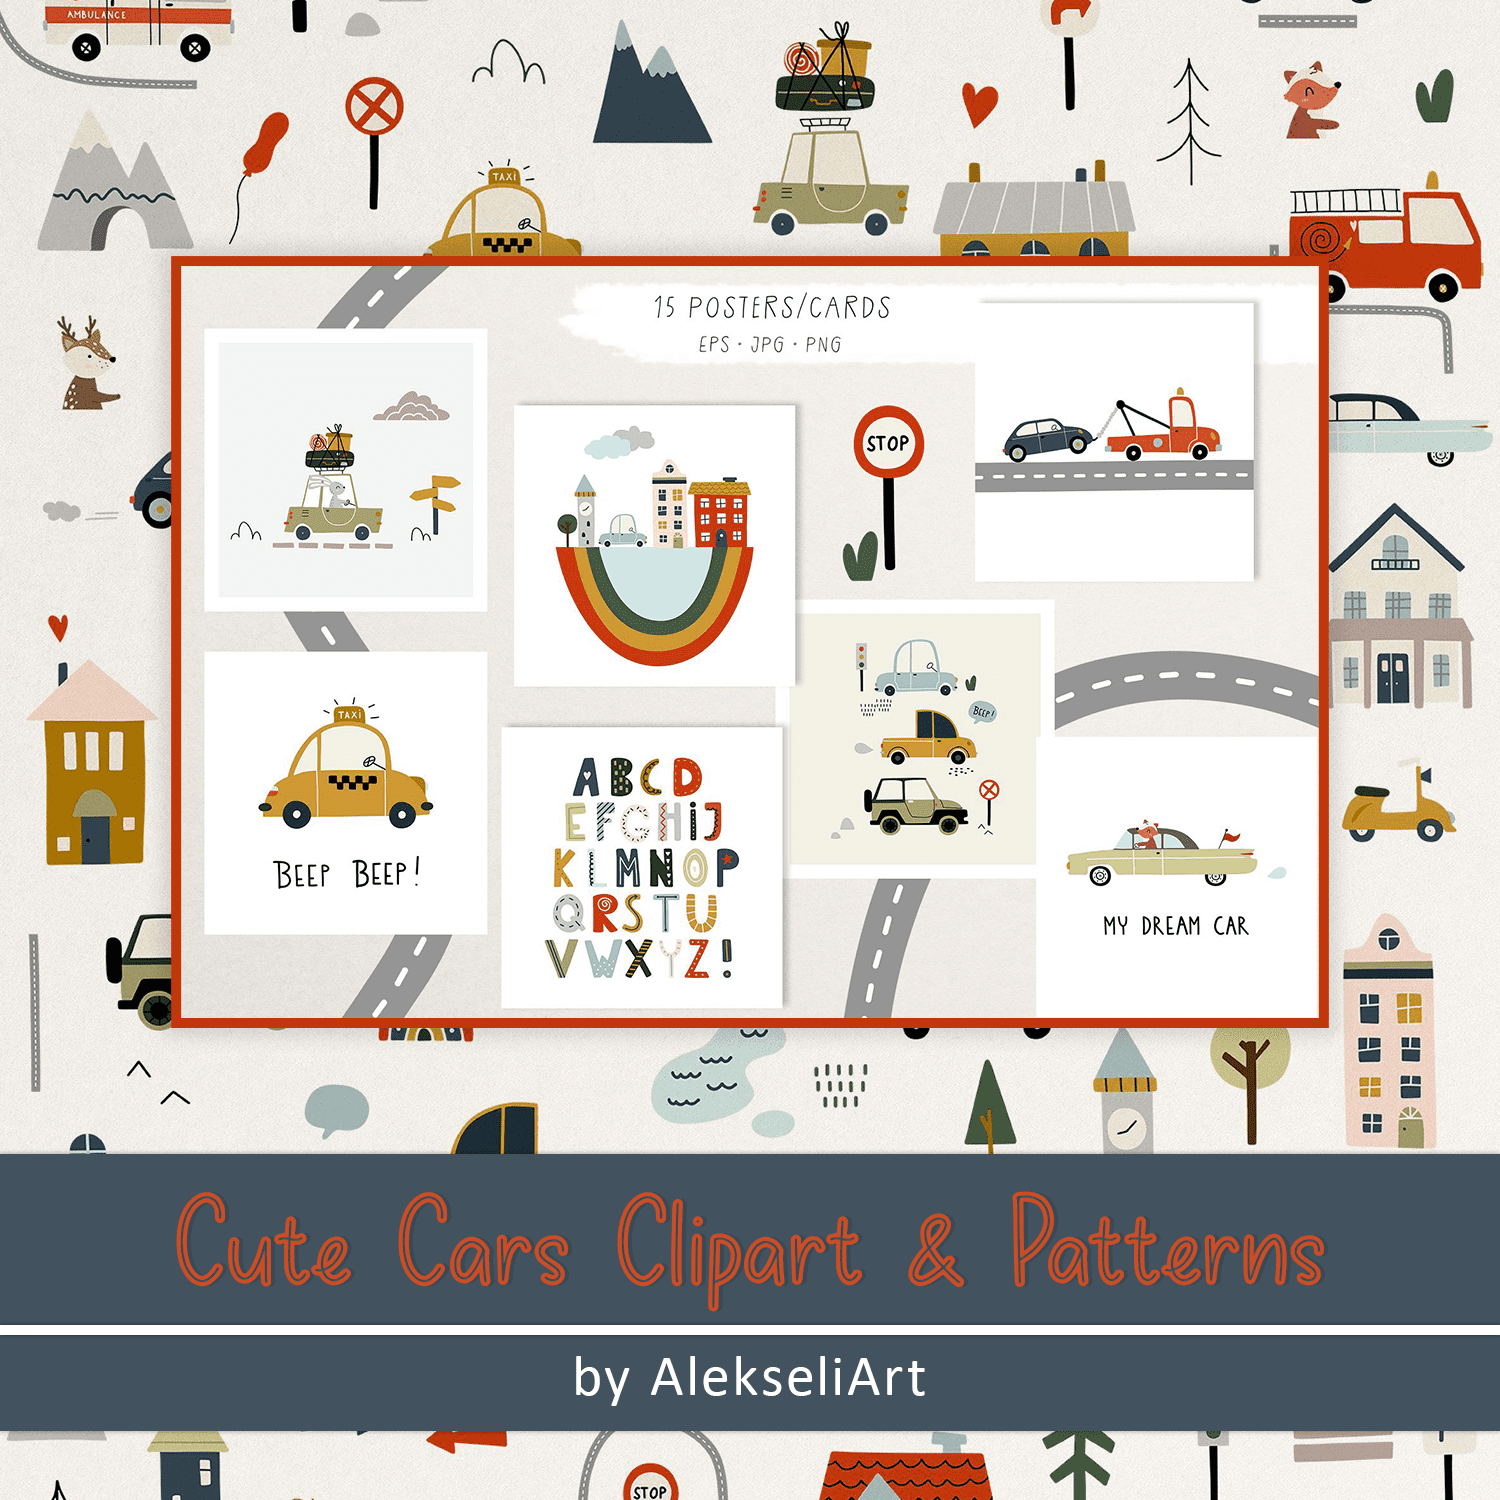 Cute Cars Clipart & Patterns cover.